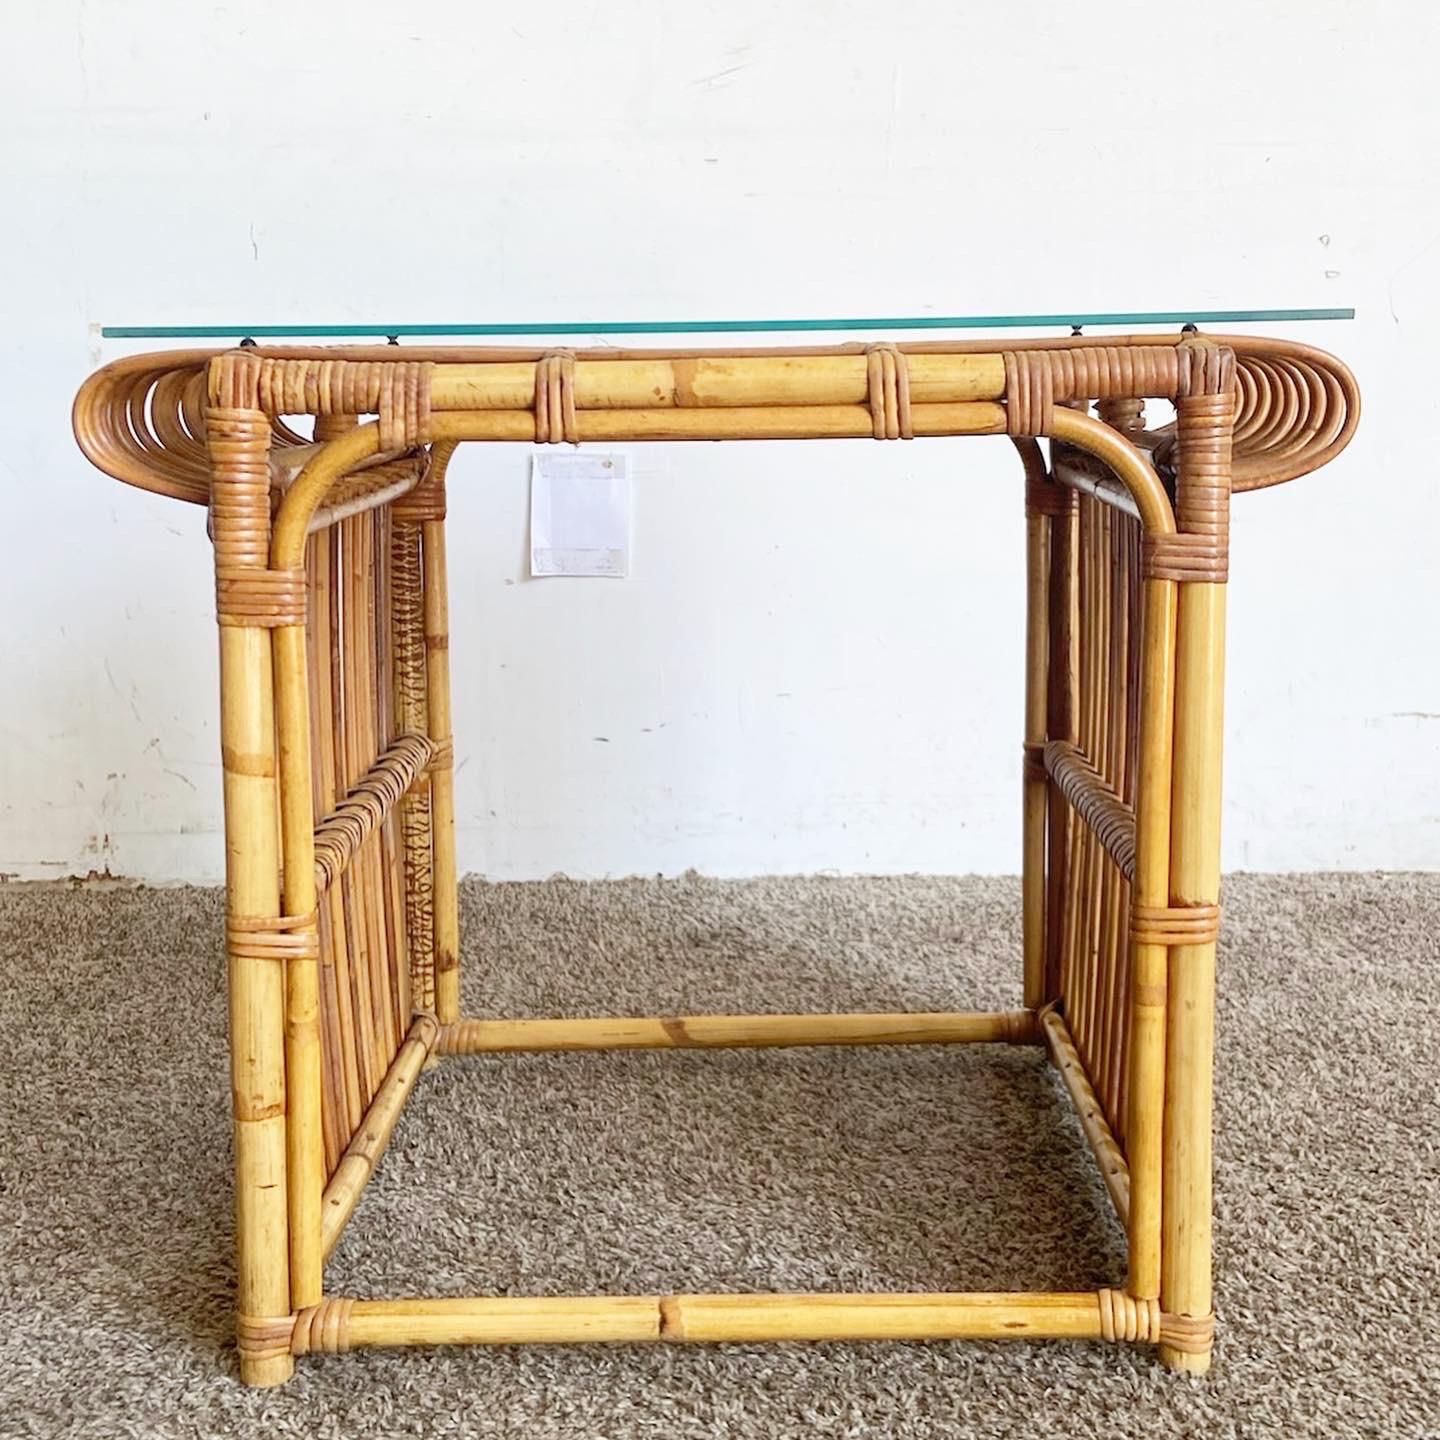 Enhance your decor with the Boho Chic Bamboo Glass Top Side Table. Featuring a sturdy bamboo base and a sleek glass top, this table is the epitome of style and functionality. Its versatile design makes it an ideal addition to various decor styles,